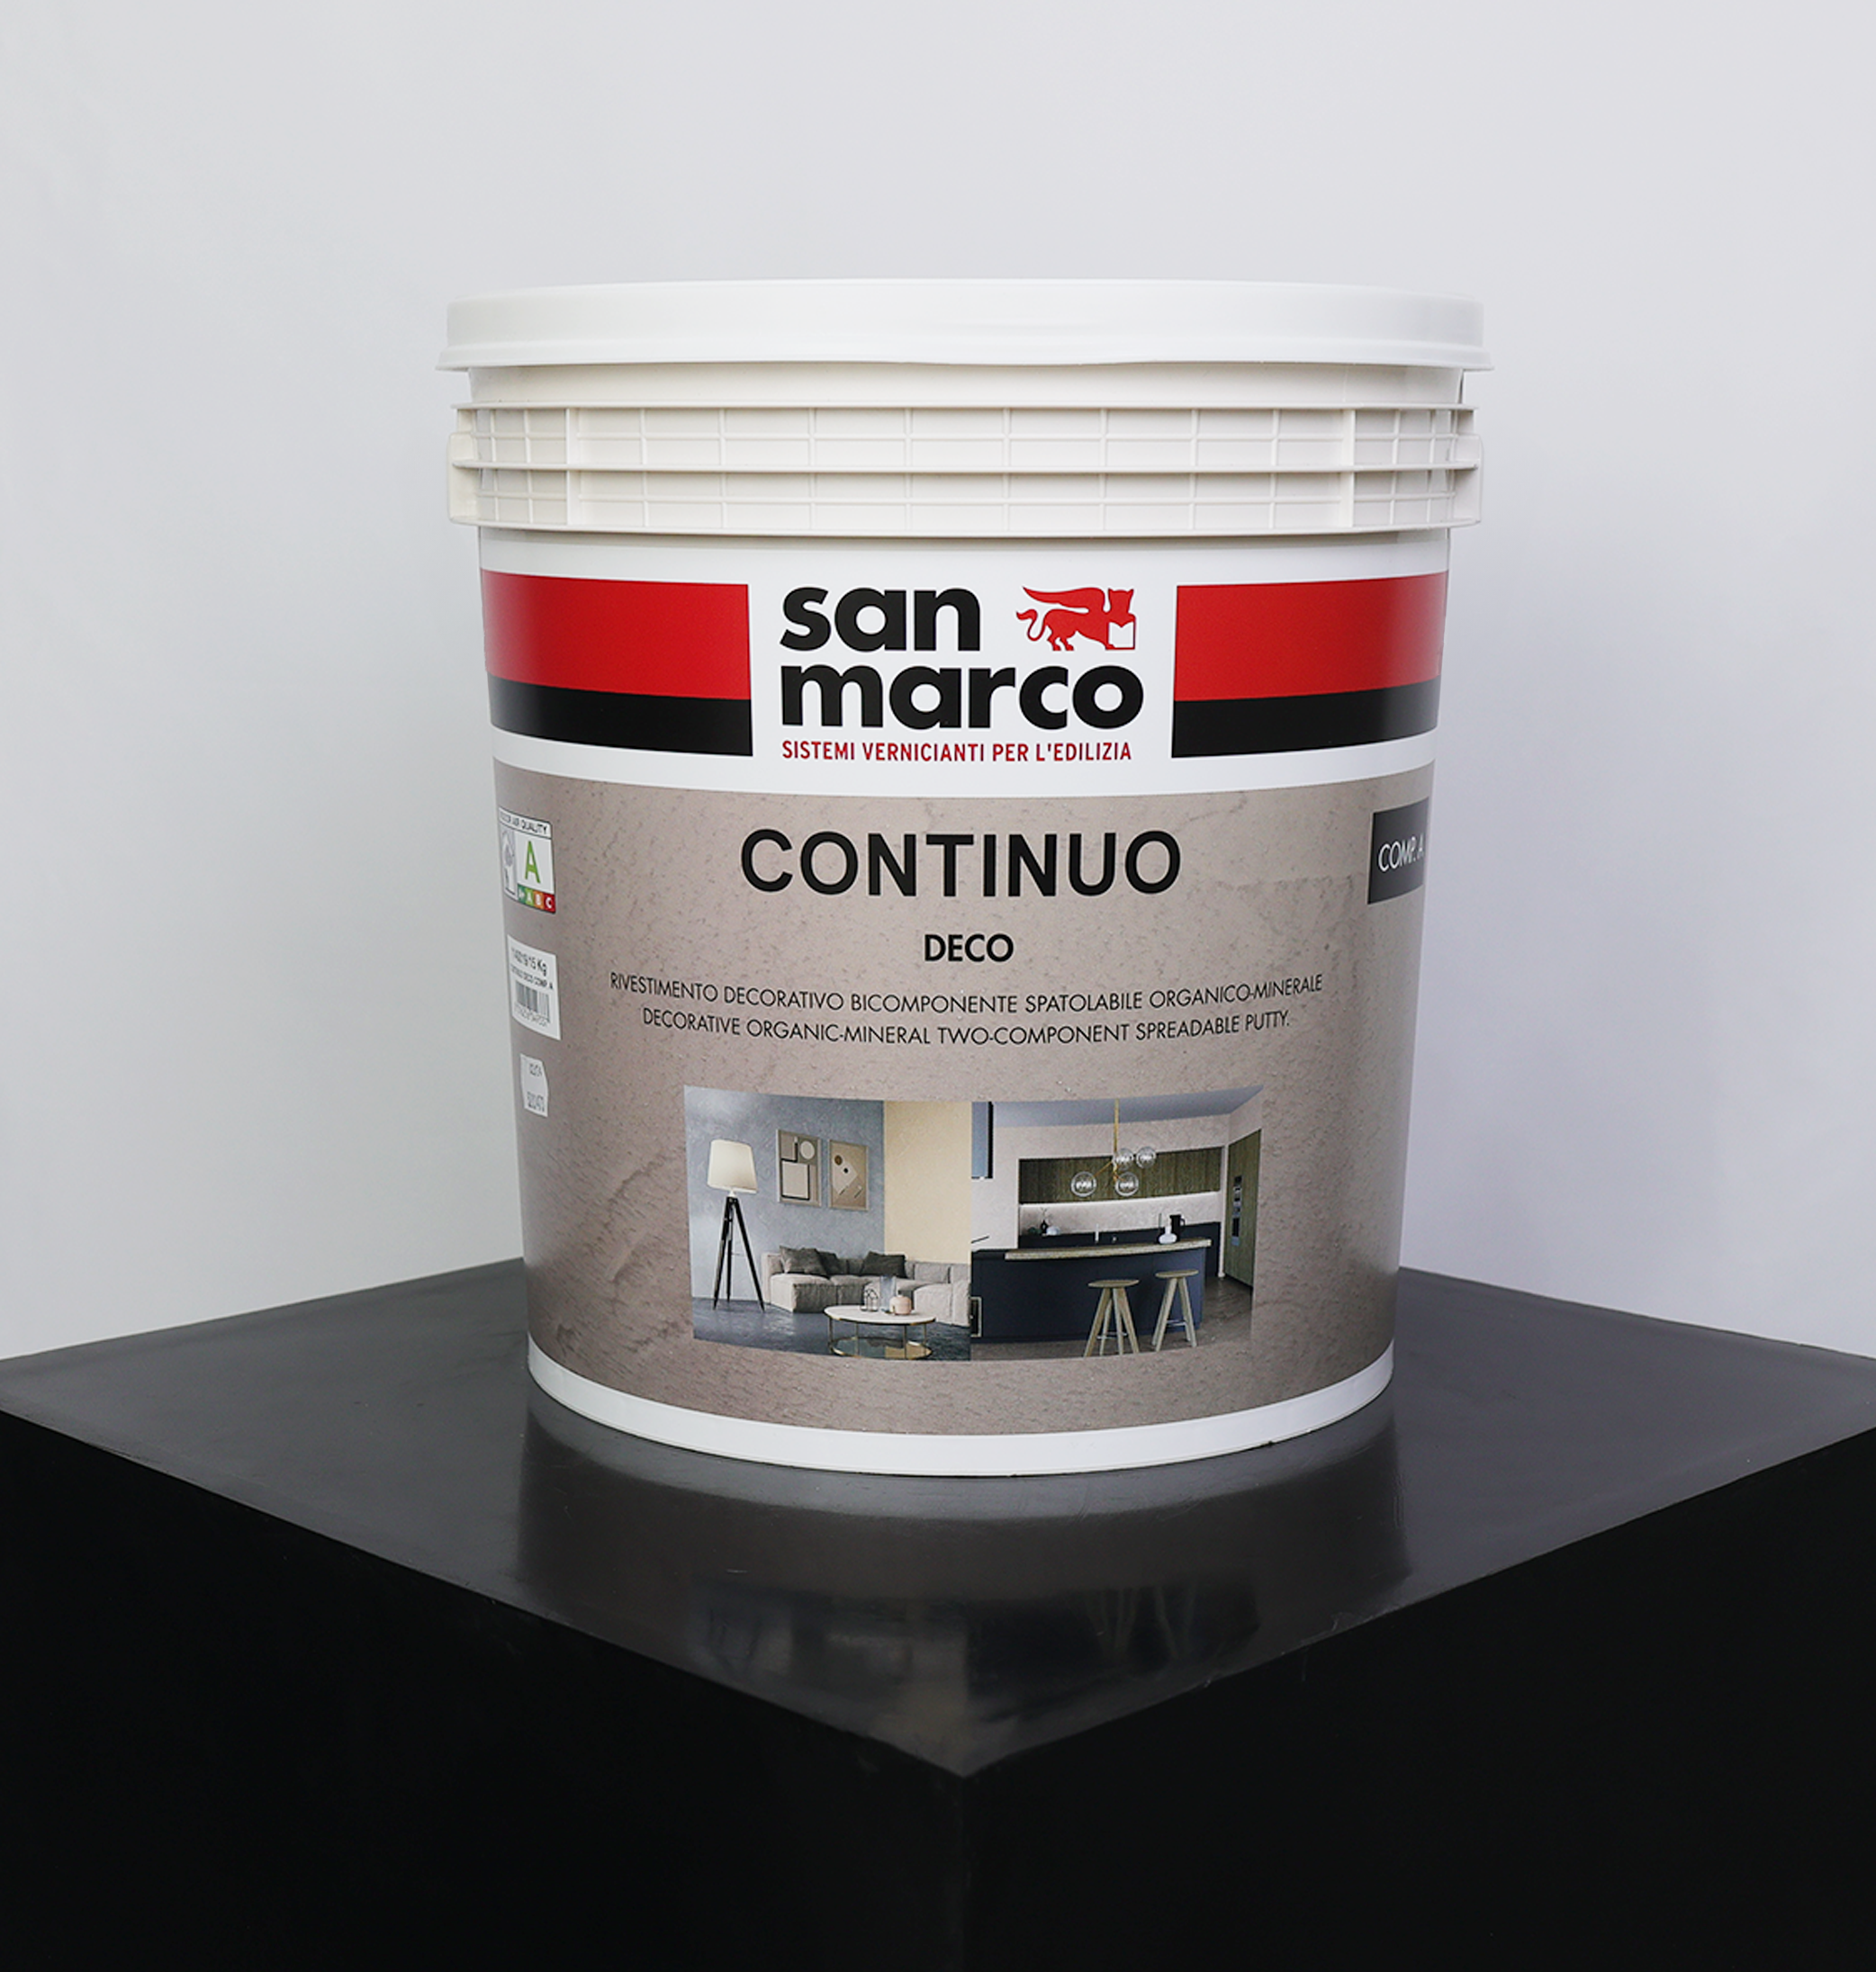 Continuo Deco Component A - Decorative Plaster For Microcement In Selected Colour (Requires Deco Component B)